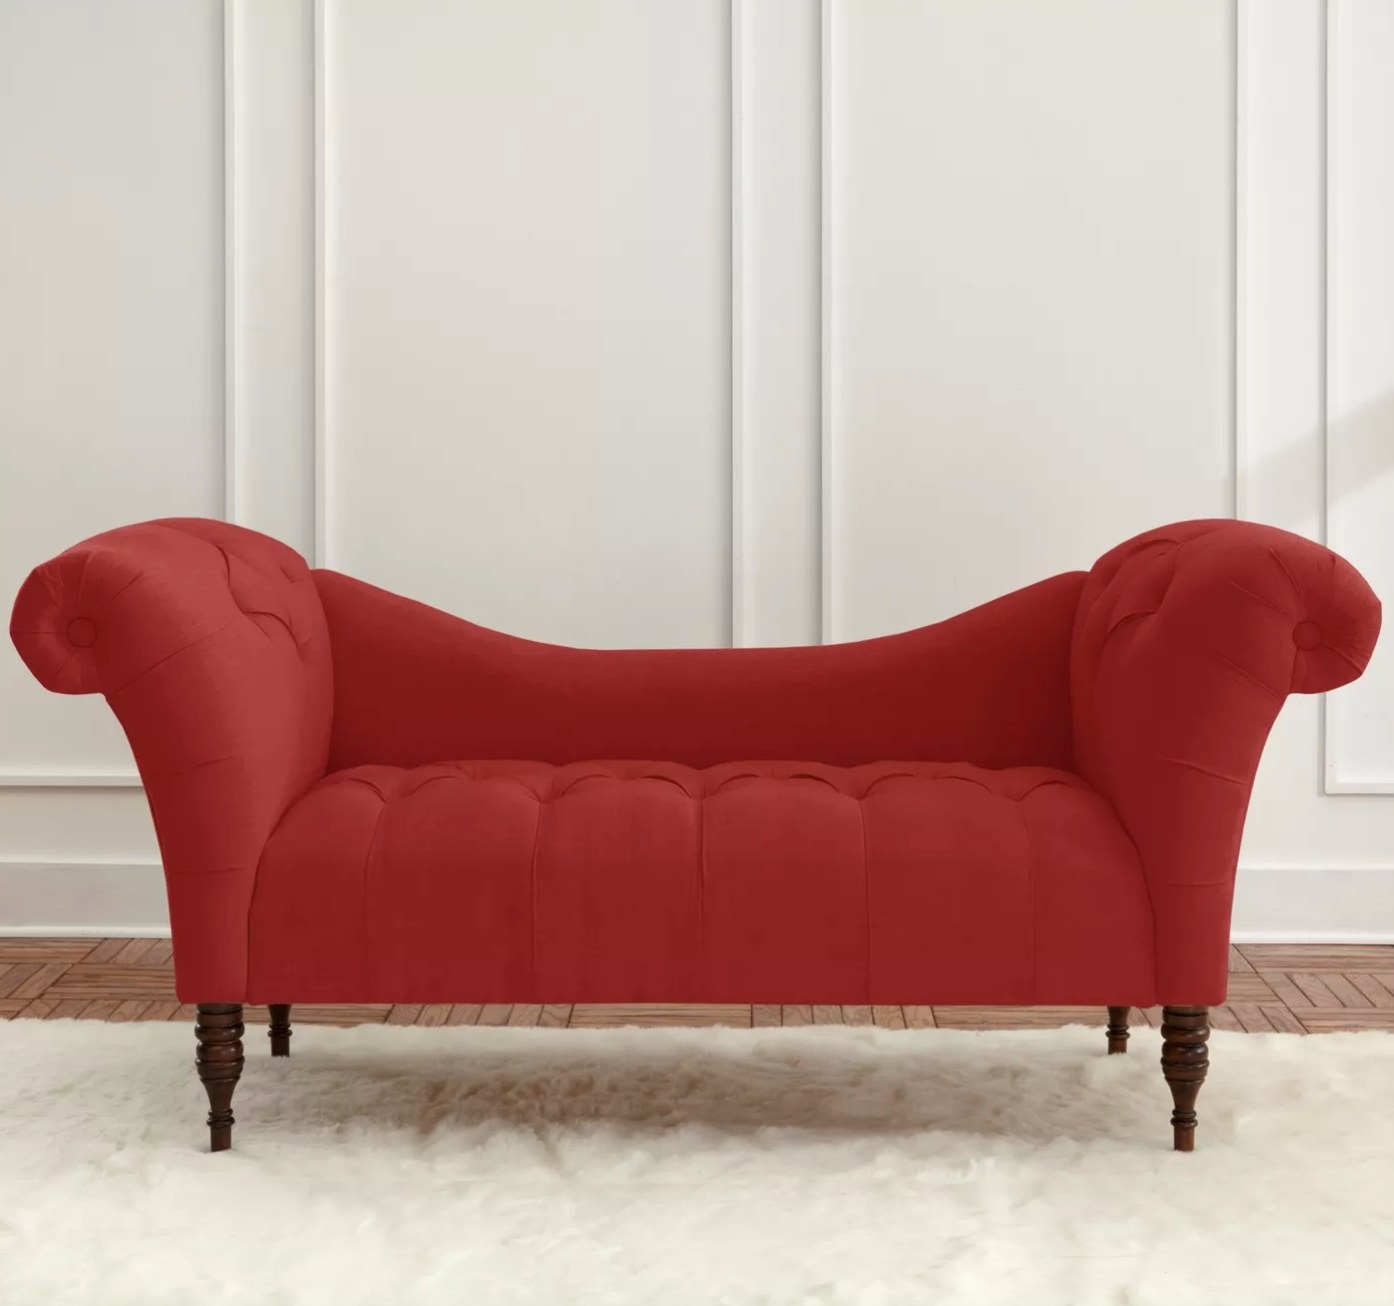 The tufted chaise sofa in linen antique red